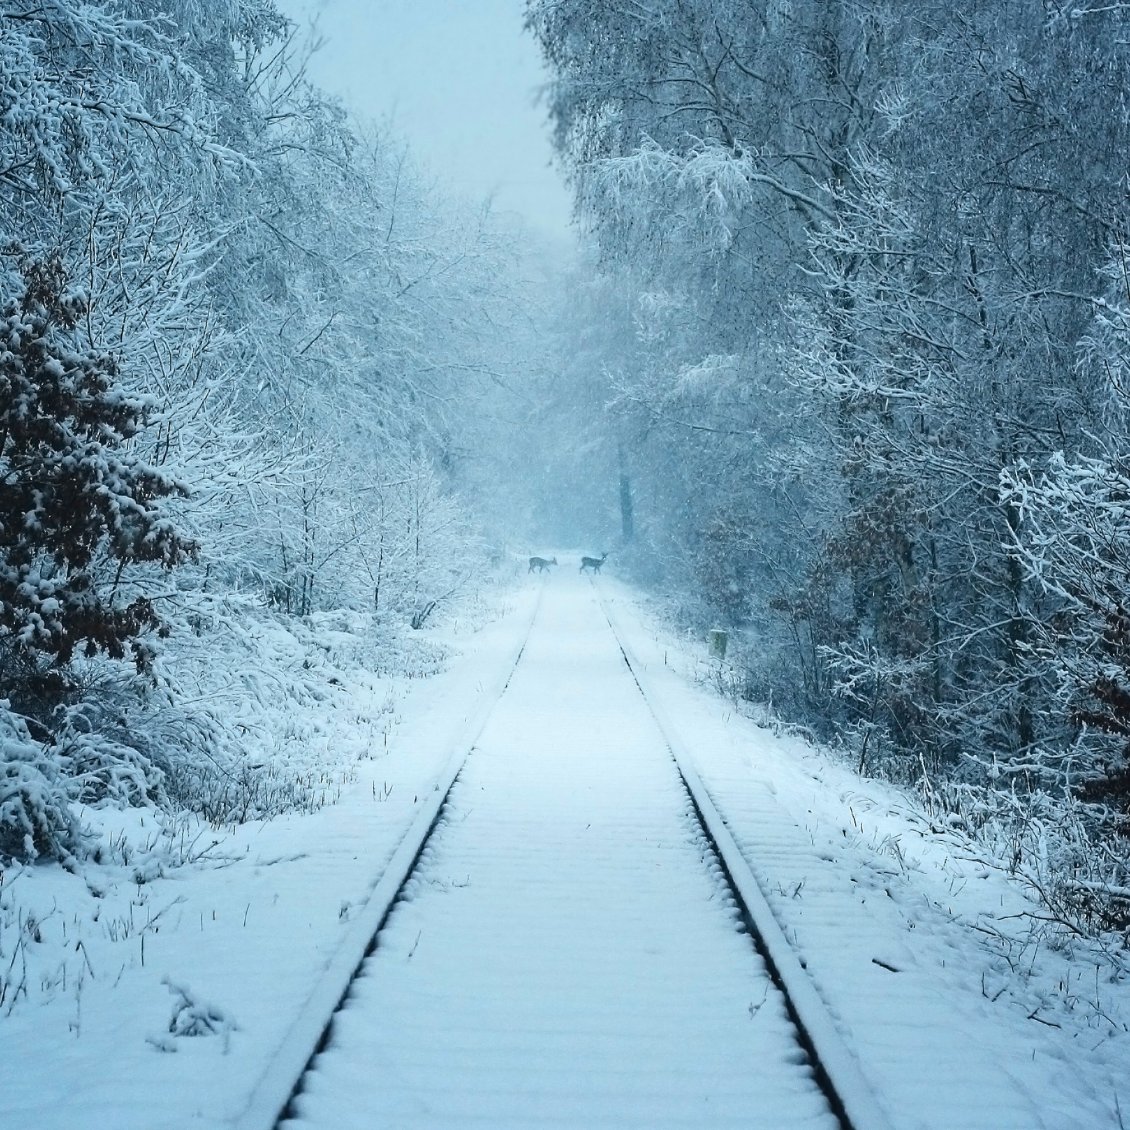 Download Wallpaper Wild animal deers on a railroad - White Winter seaon